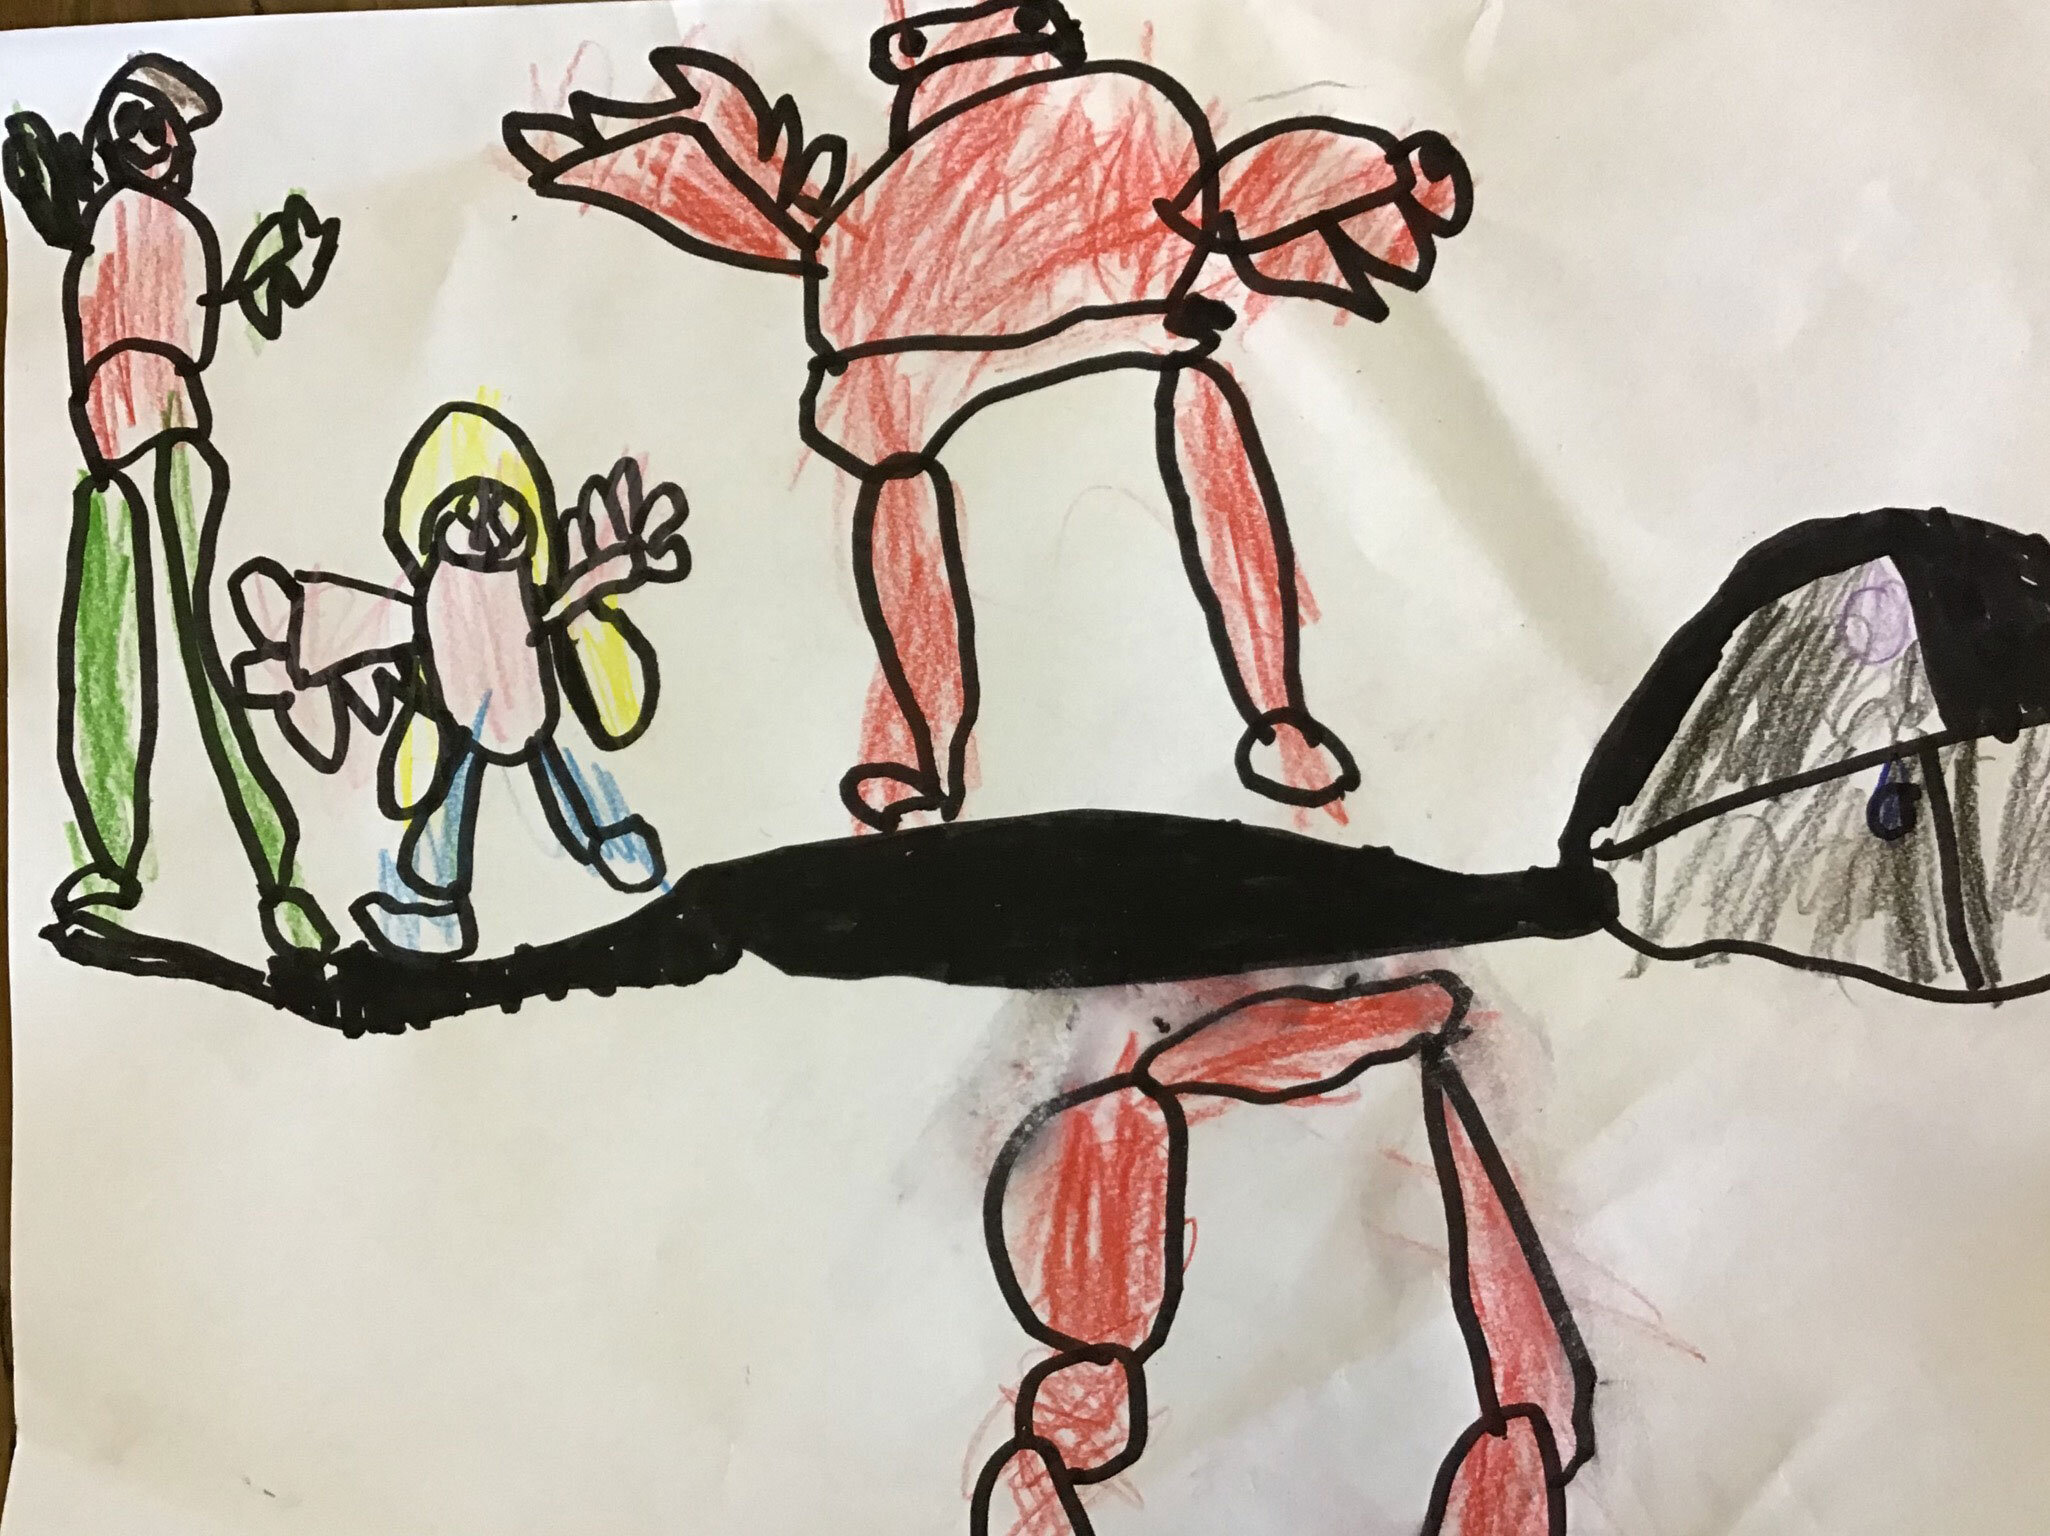 Molly Foubister aged 5 Crabbing